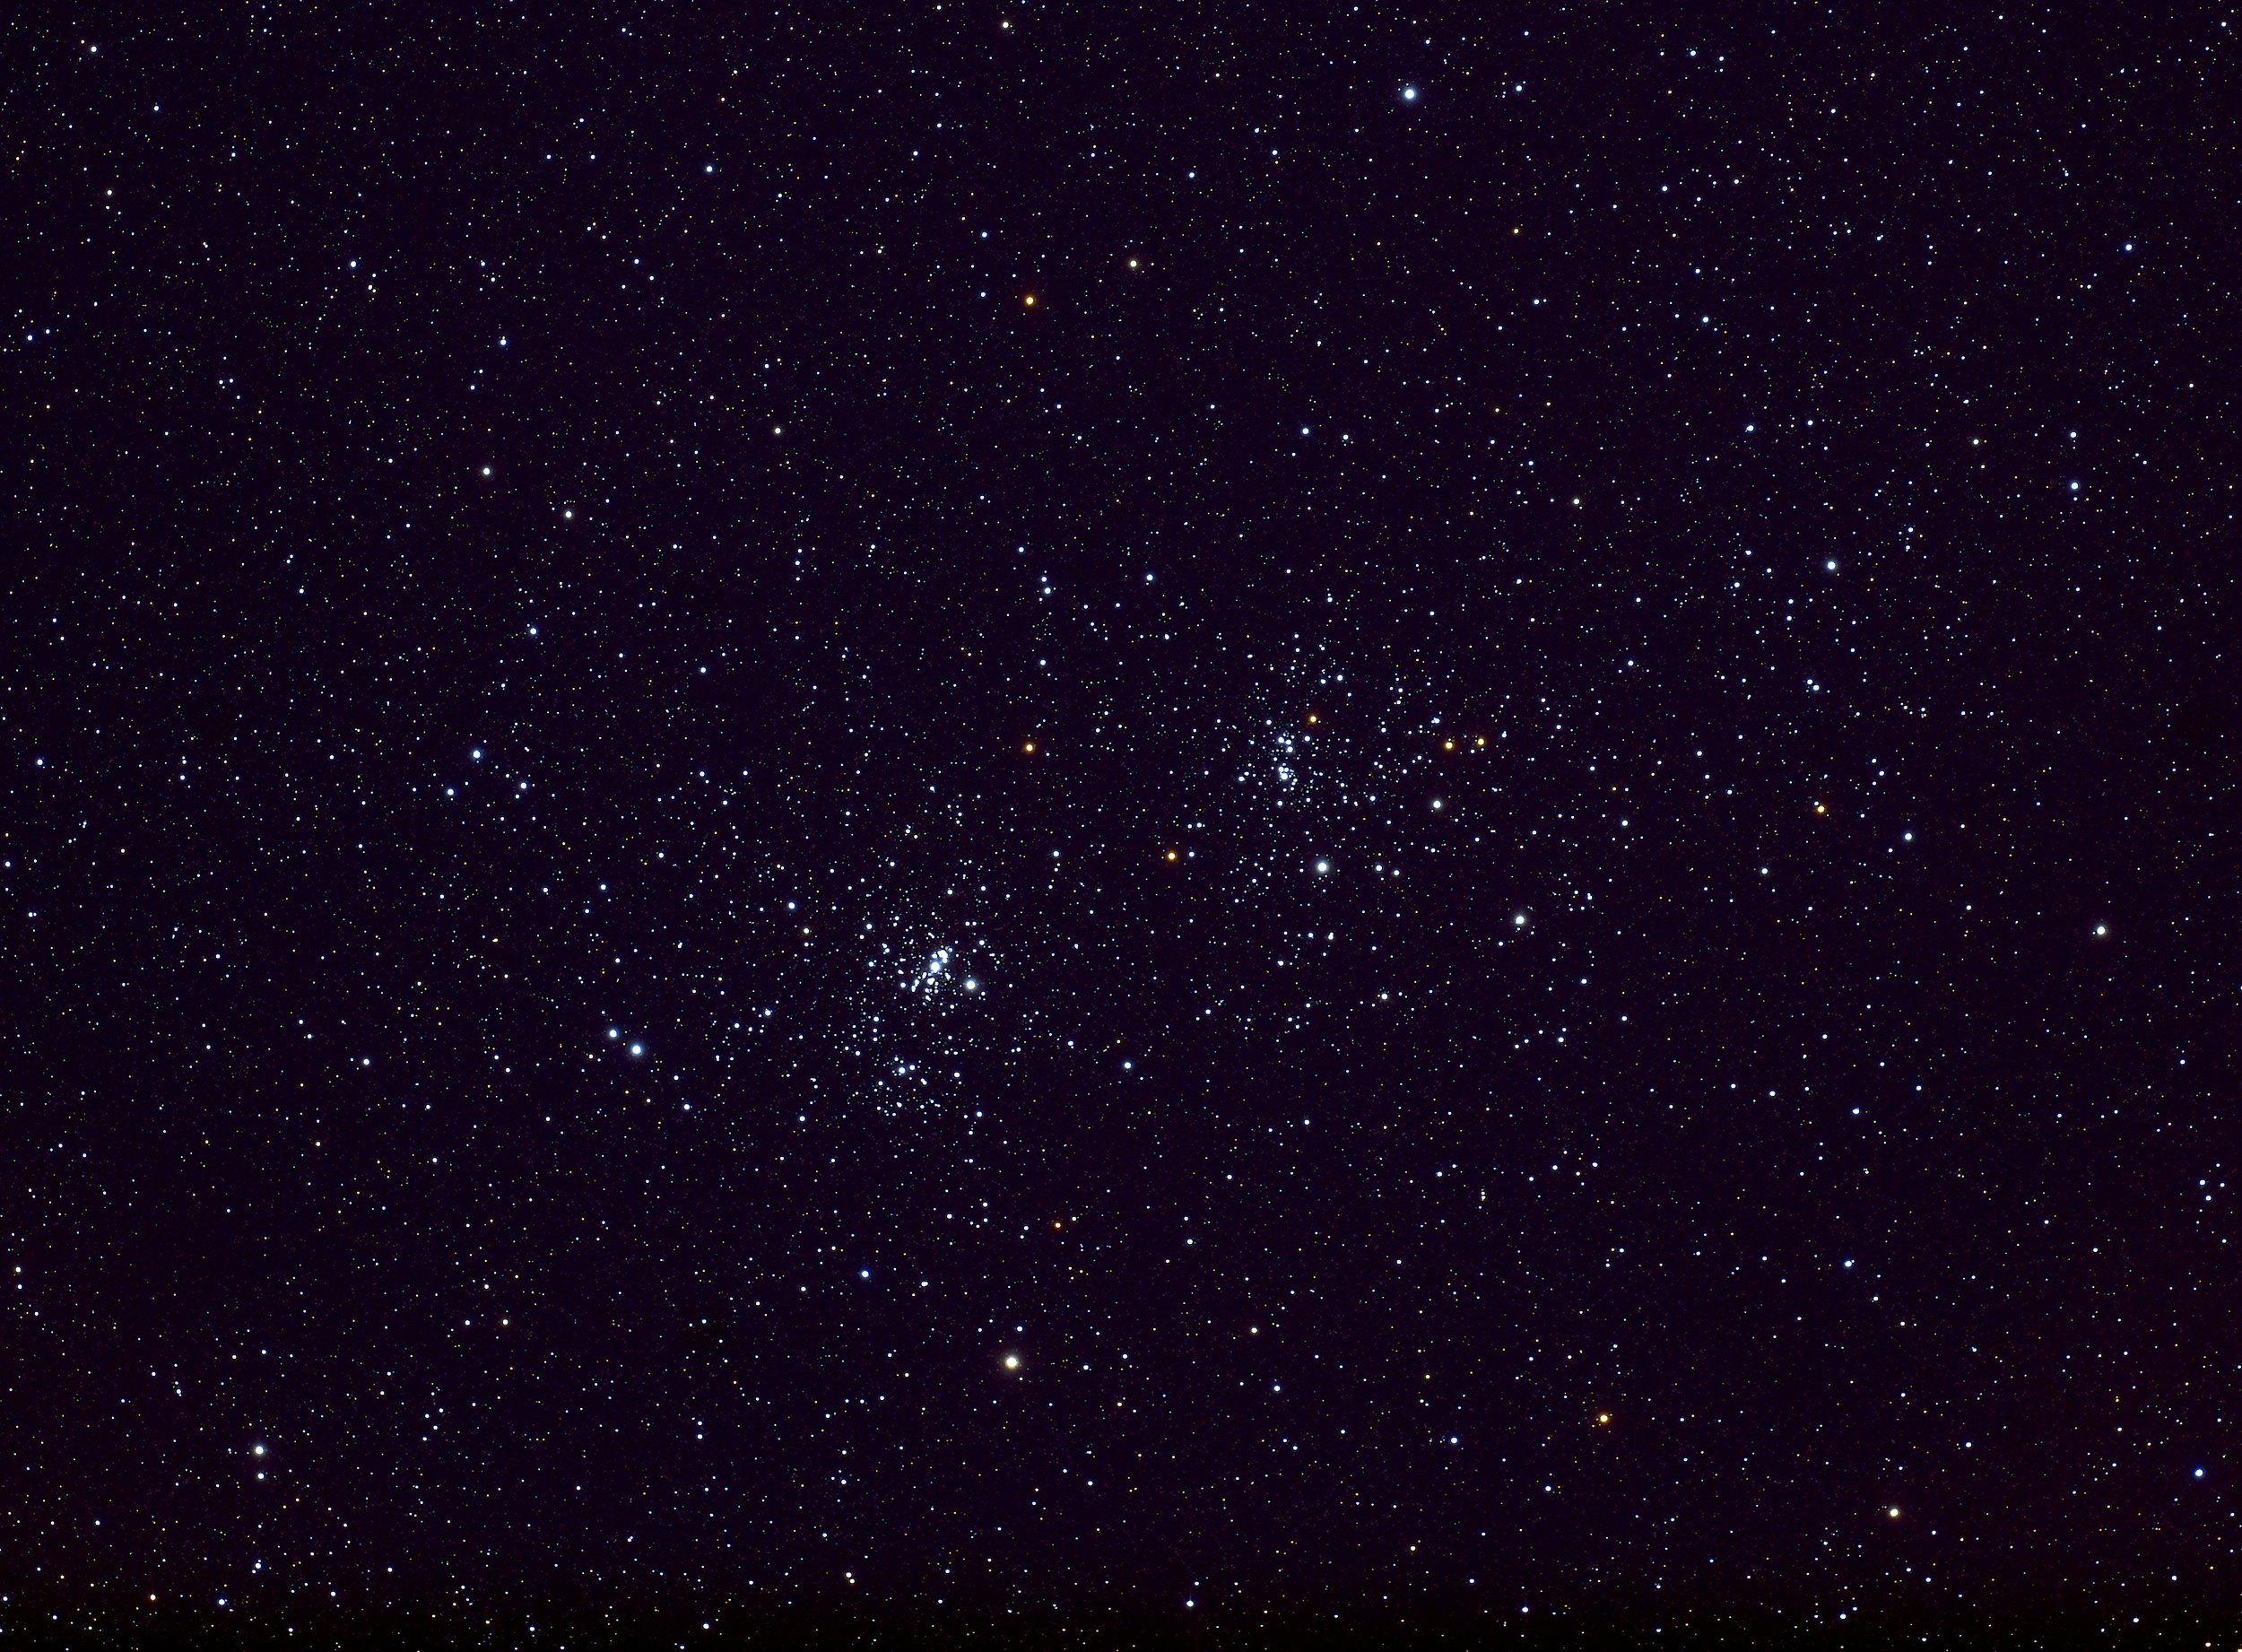 The Double Cluster in Perseus